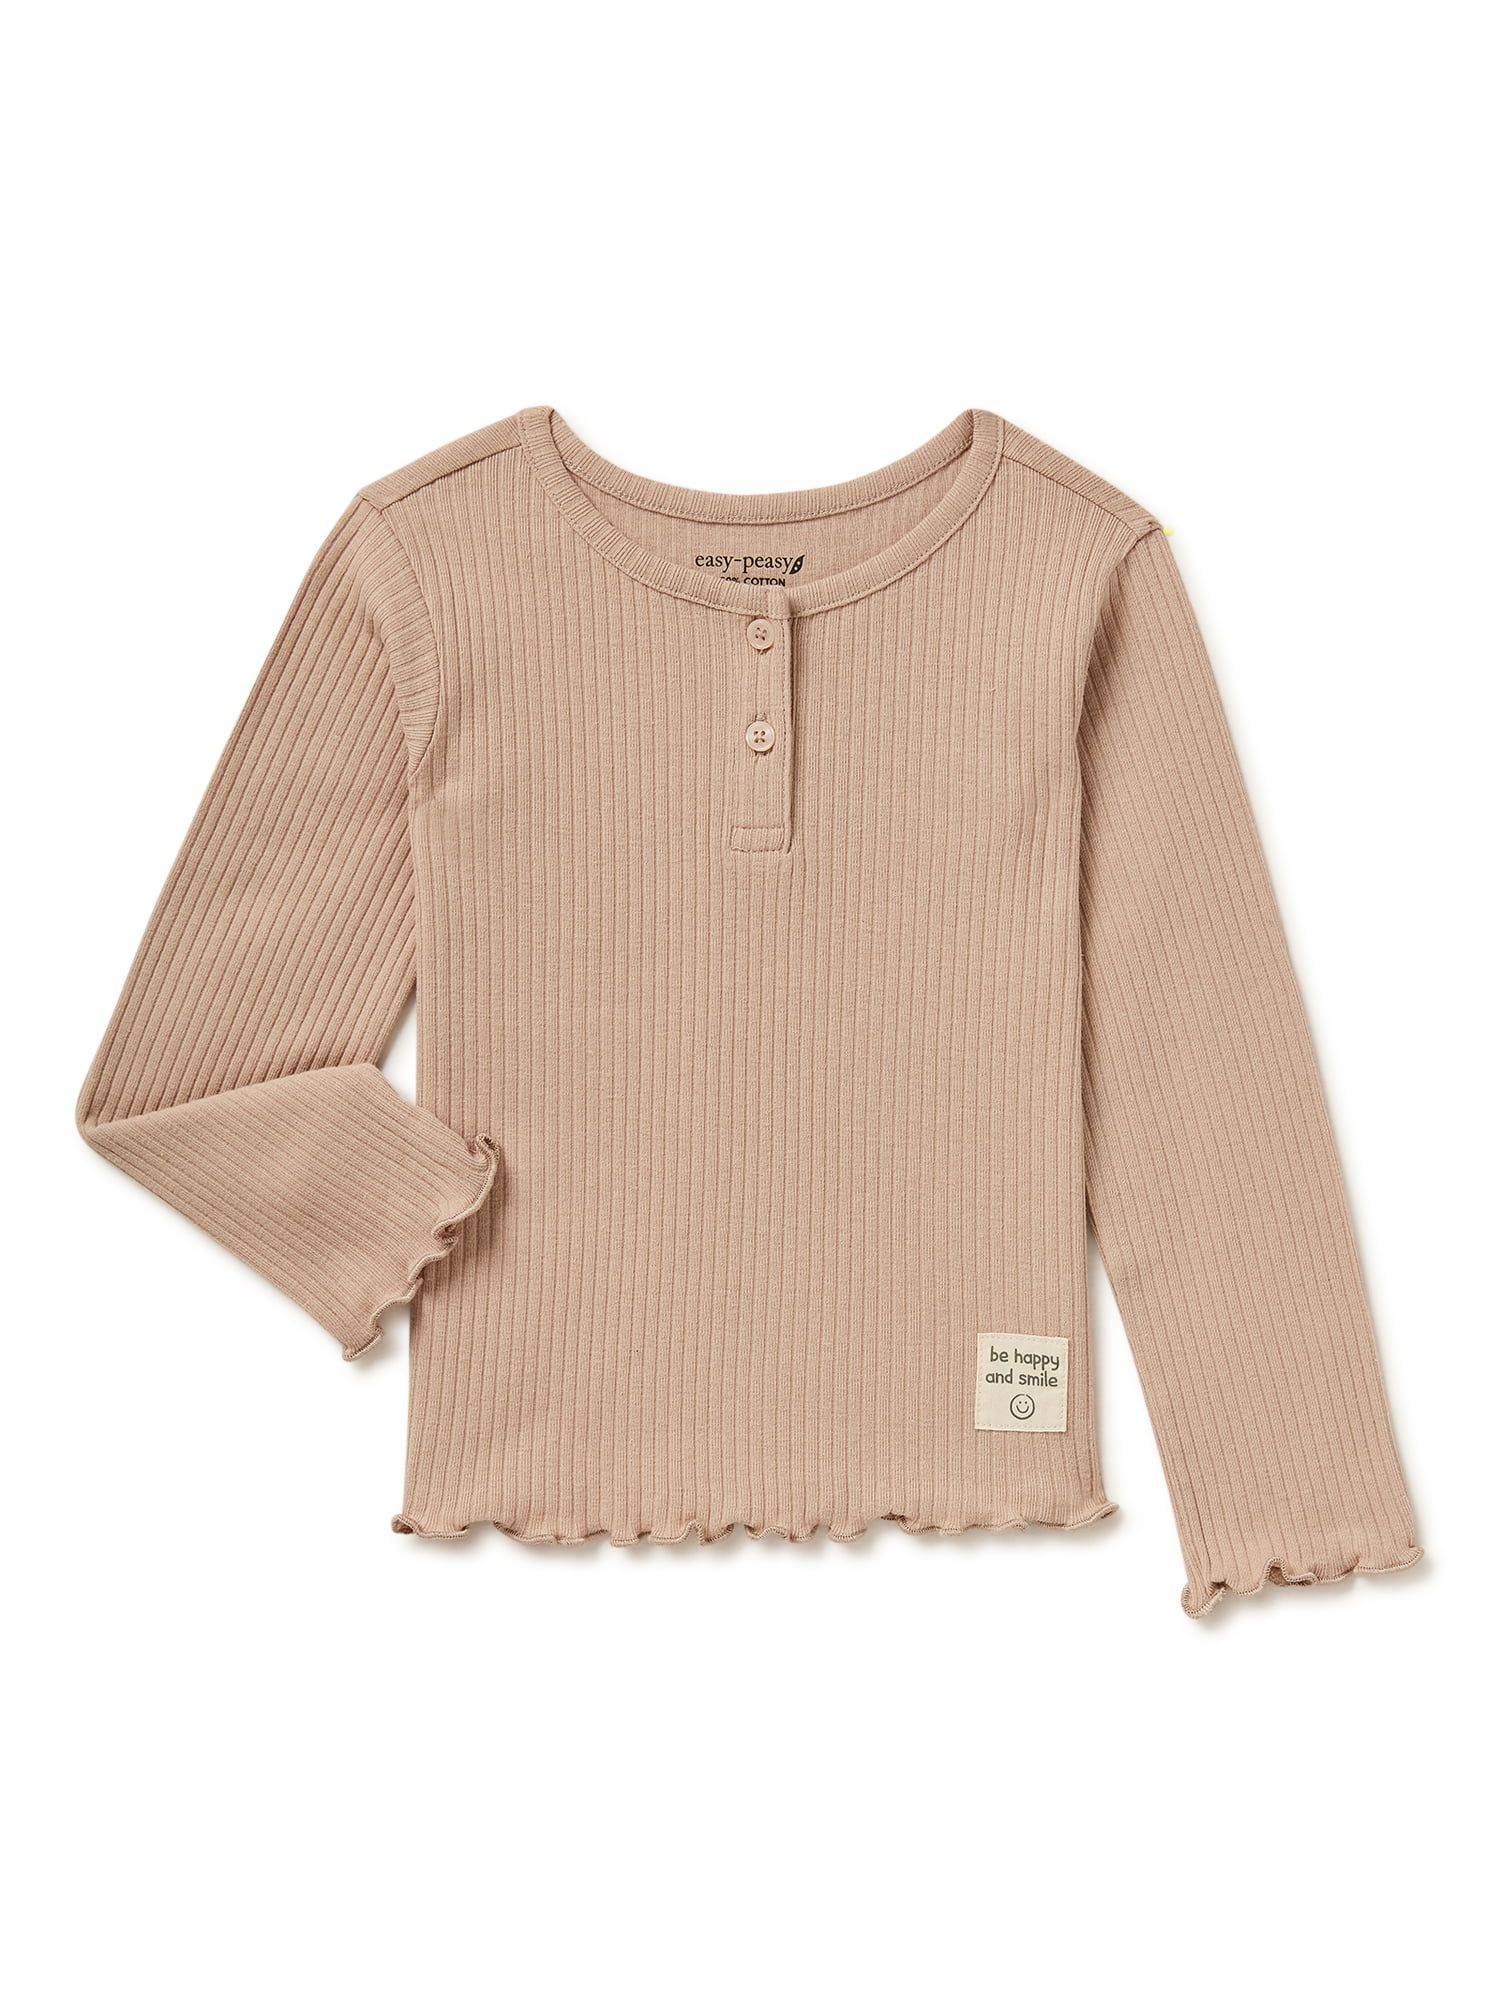 easy-peasy Baby and Toddler Girls Henley Top, Sizes 12 Months-5T | Walmart (US)